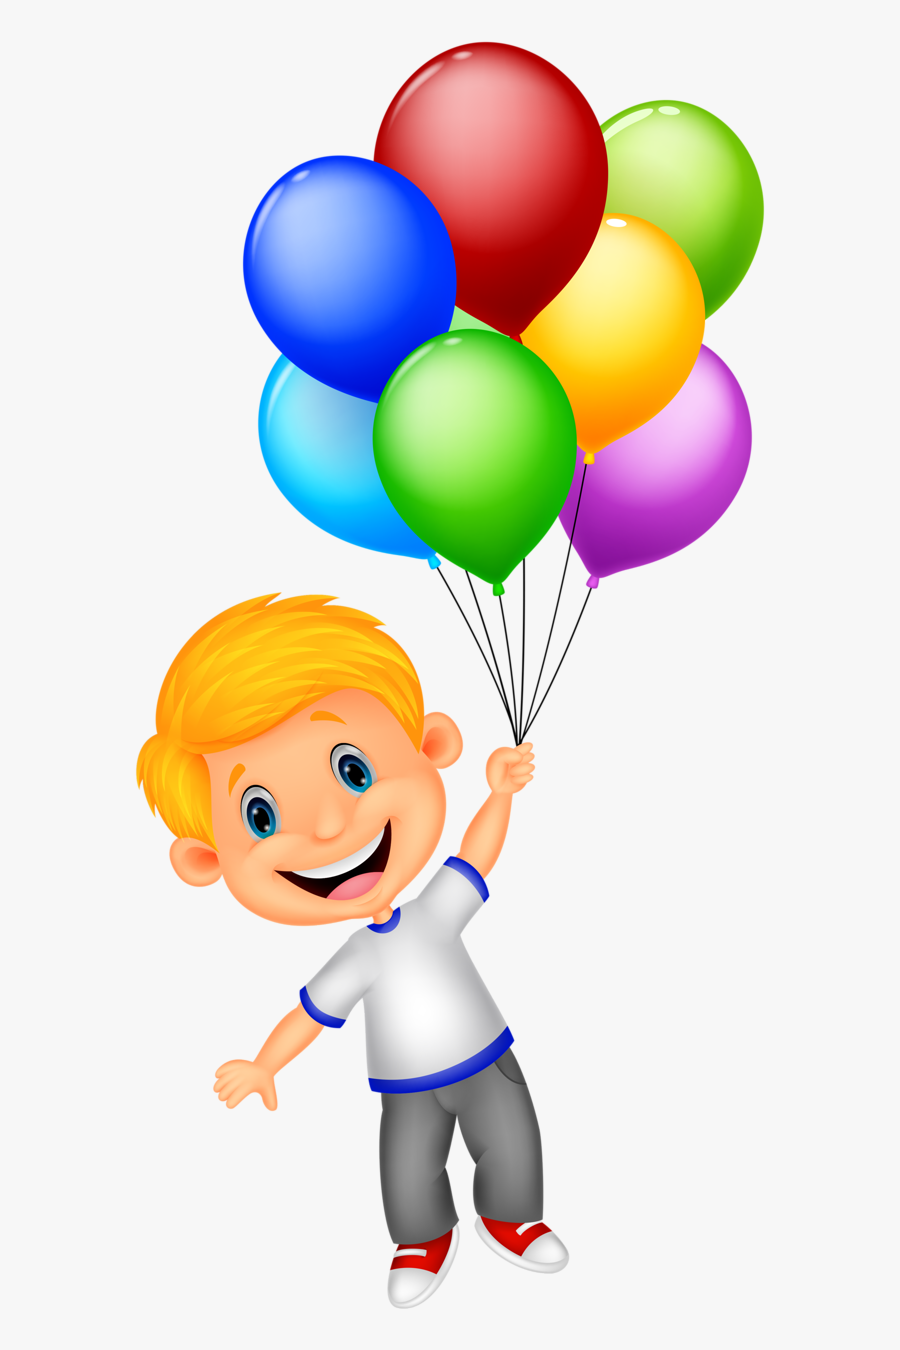 Png Pinterest Clip Art And Album - Girl Holding Balloons Clipart, Transparent Clipart